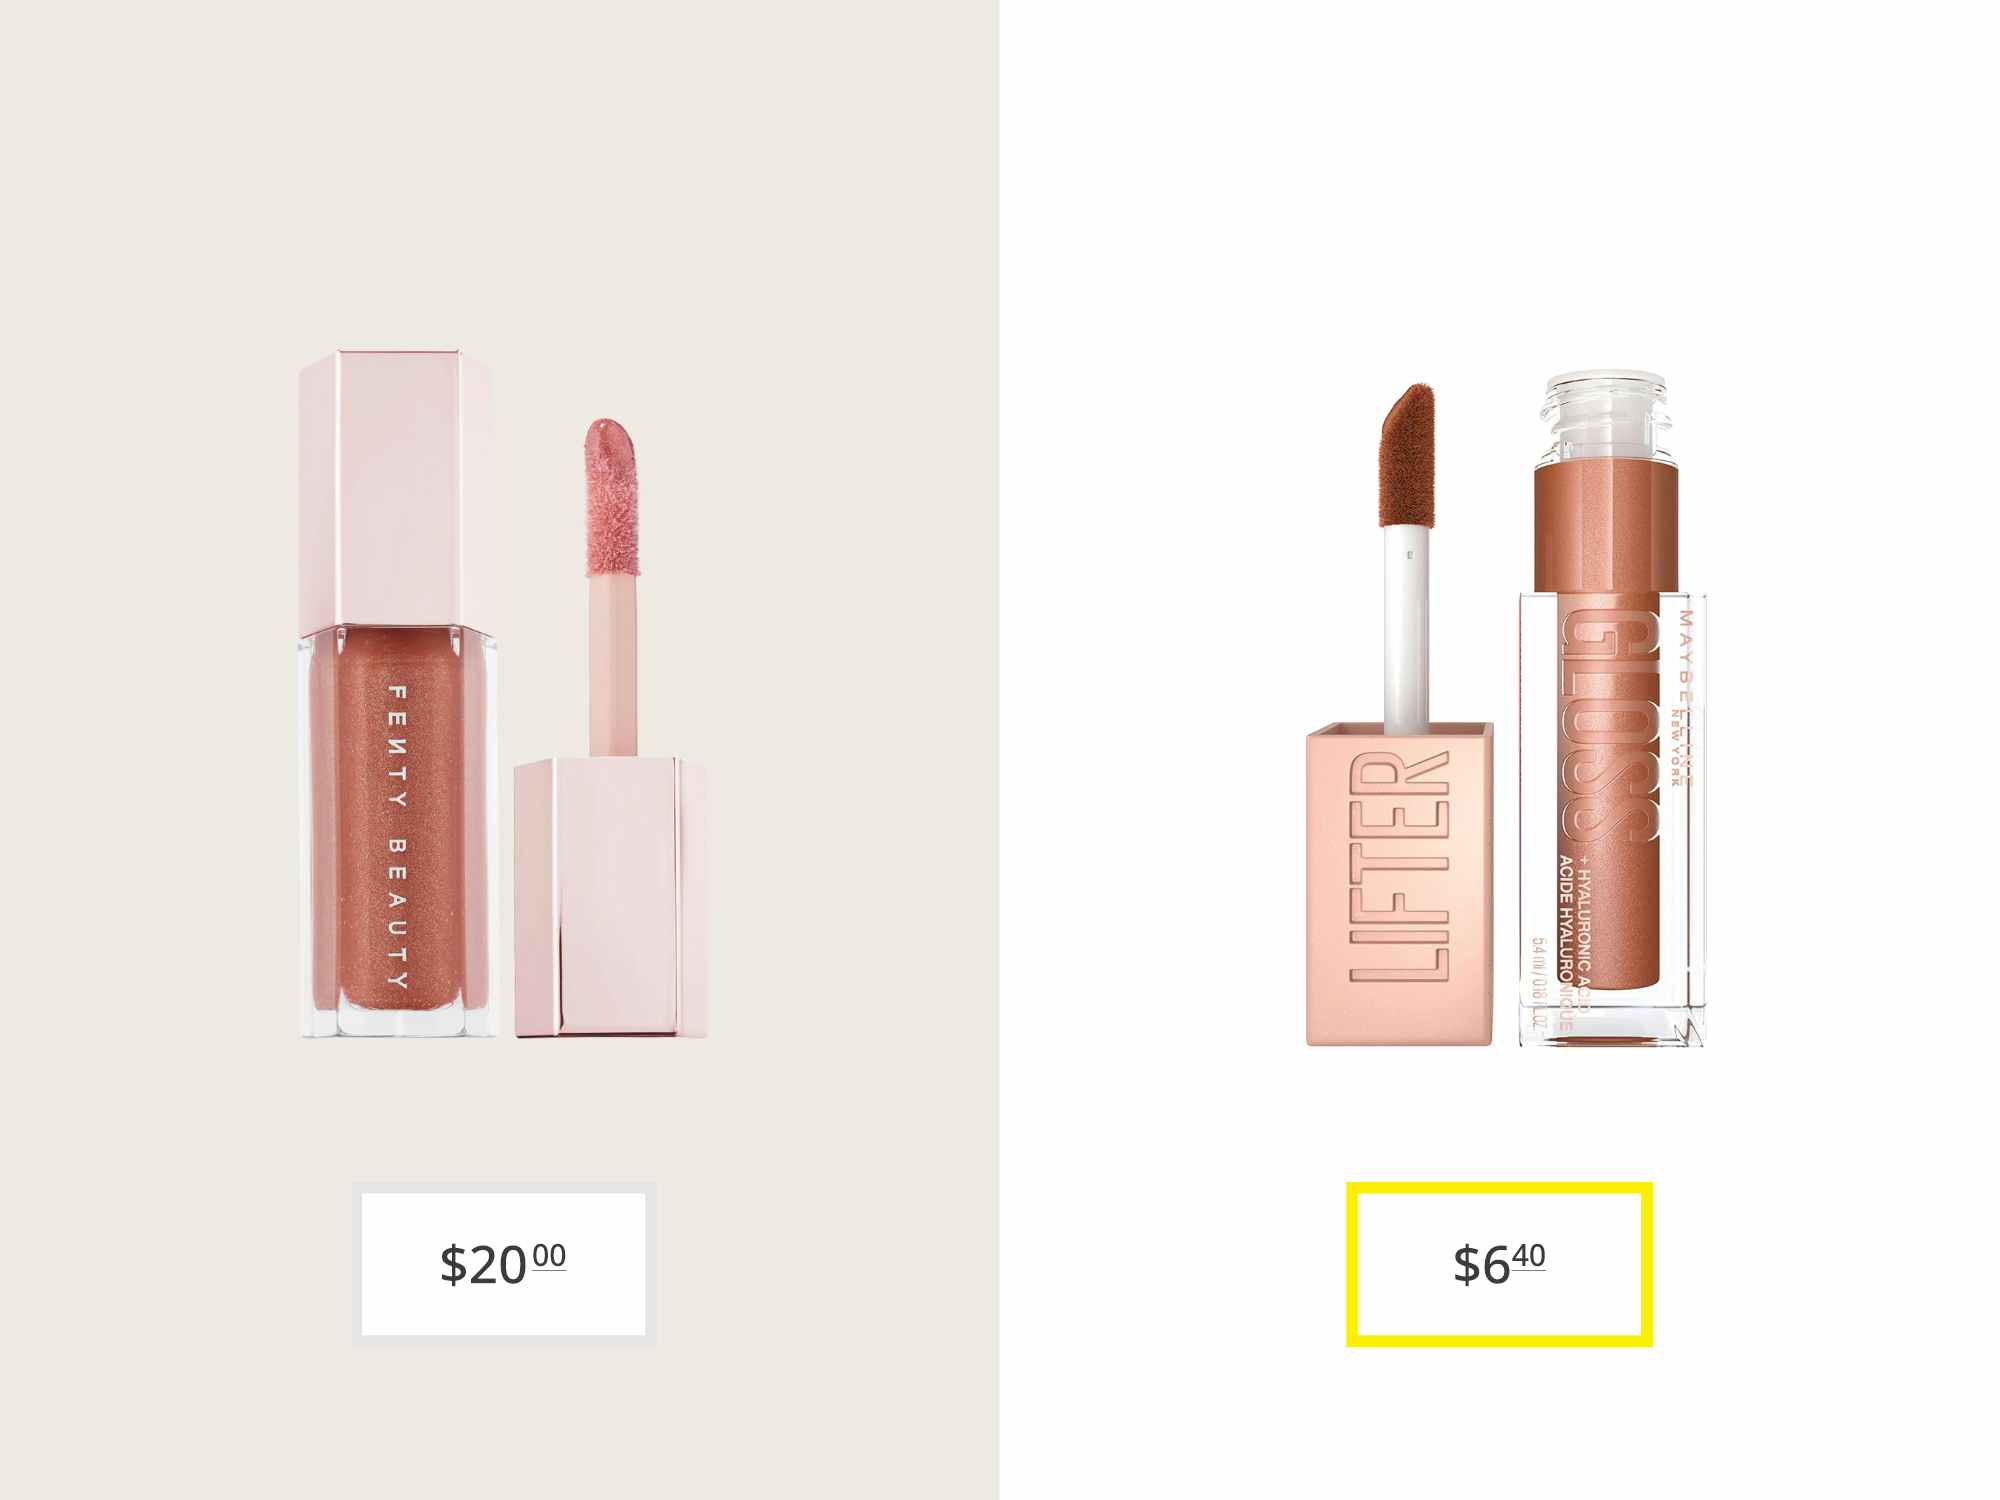 fenty beauty gloss bomb and maybelling lifter gloss lip gloss price comparison graphic